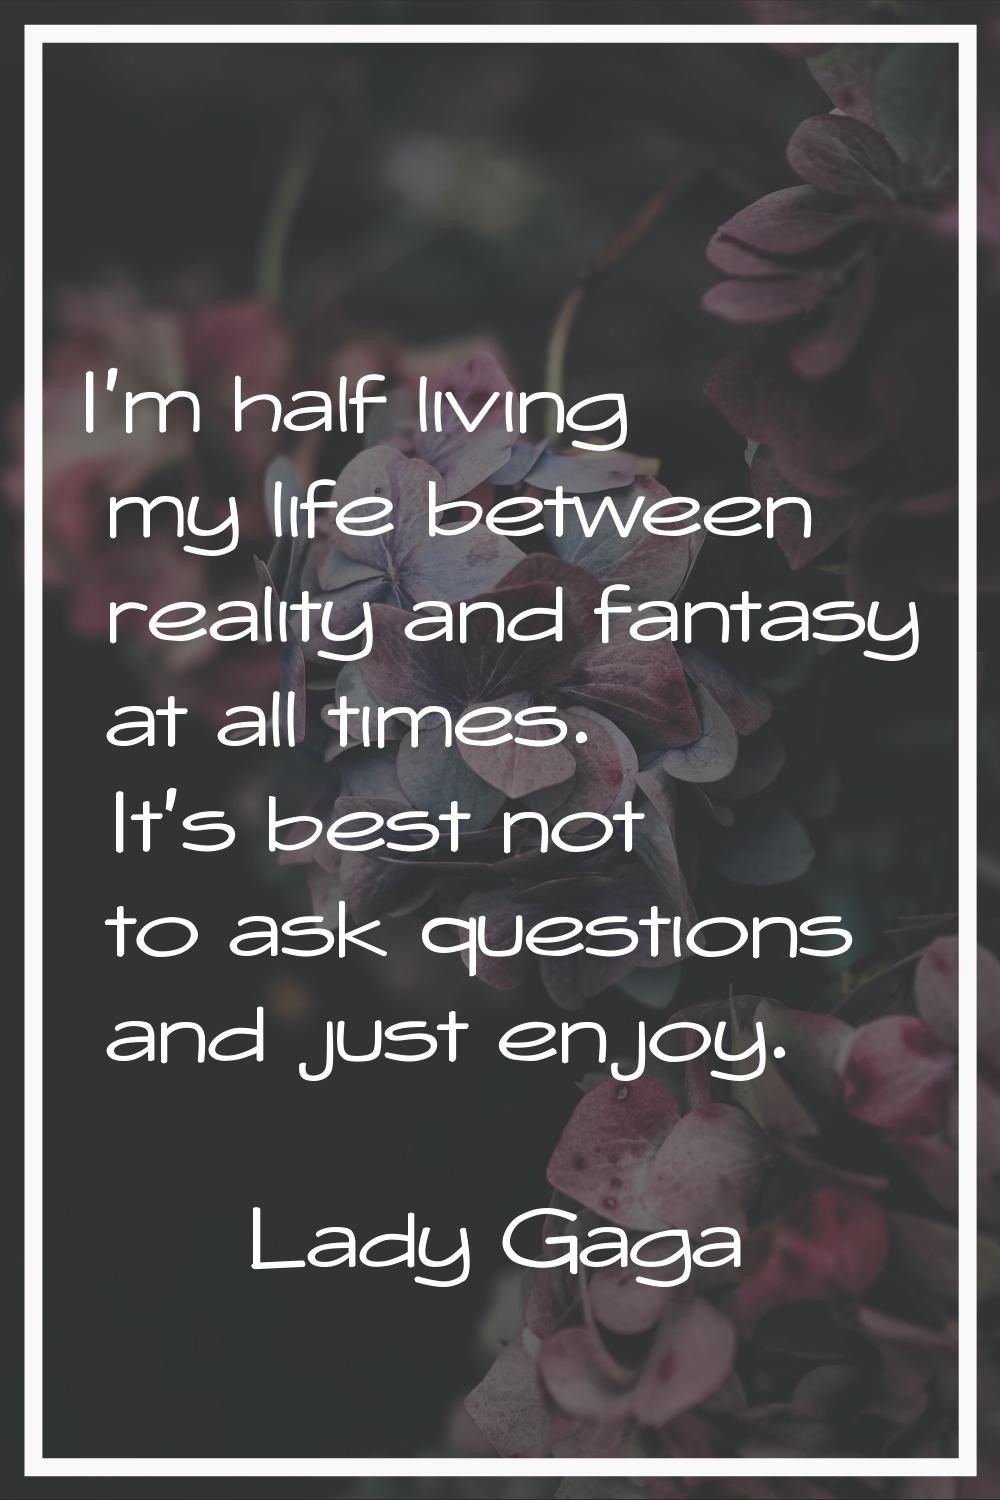 I'm half living my life between reality and fantasy at all times. It's best not to ask questions an